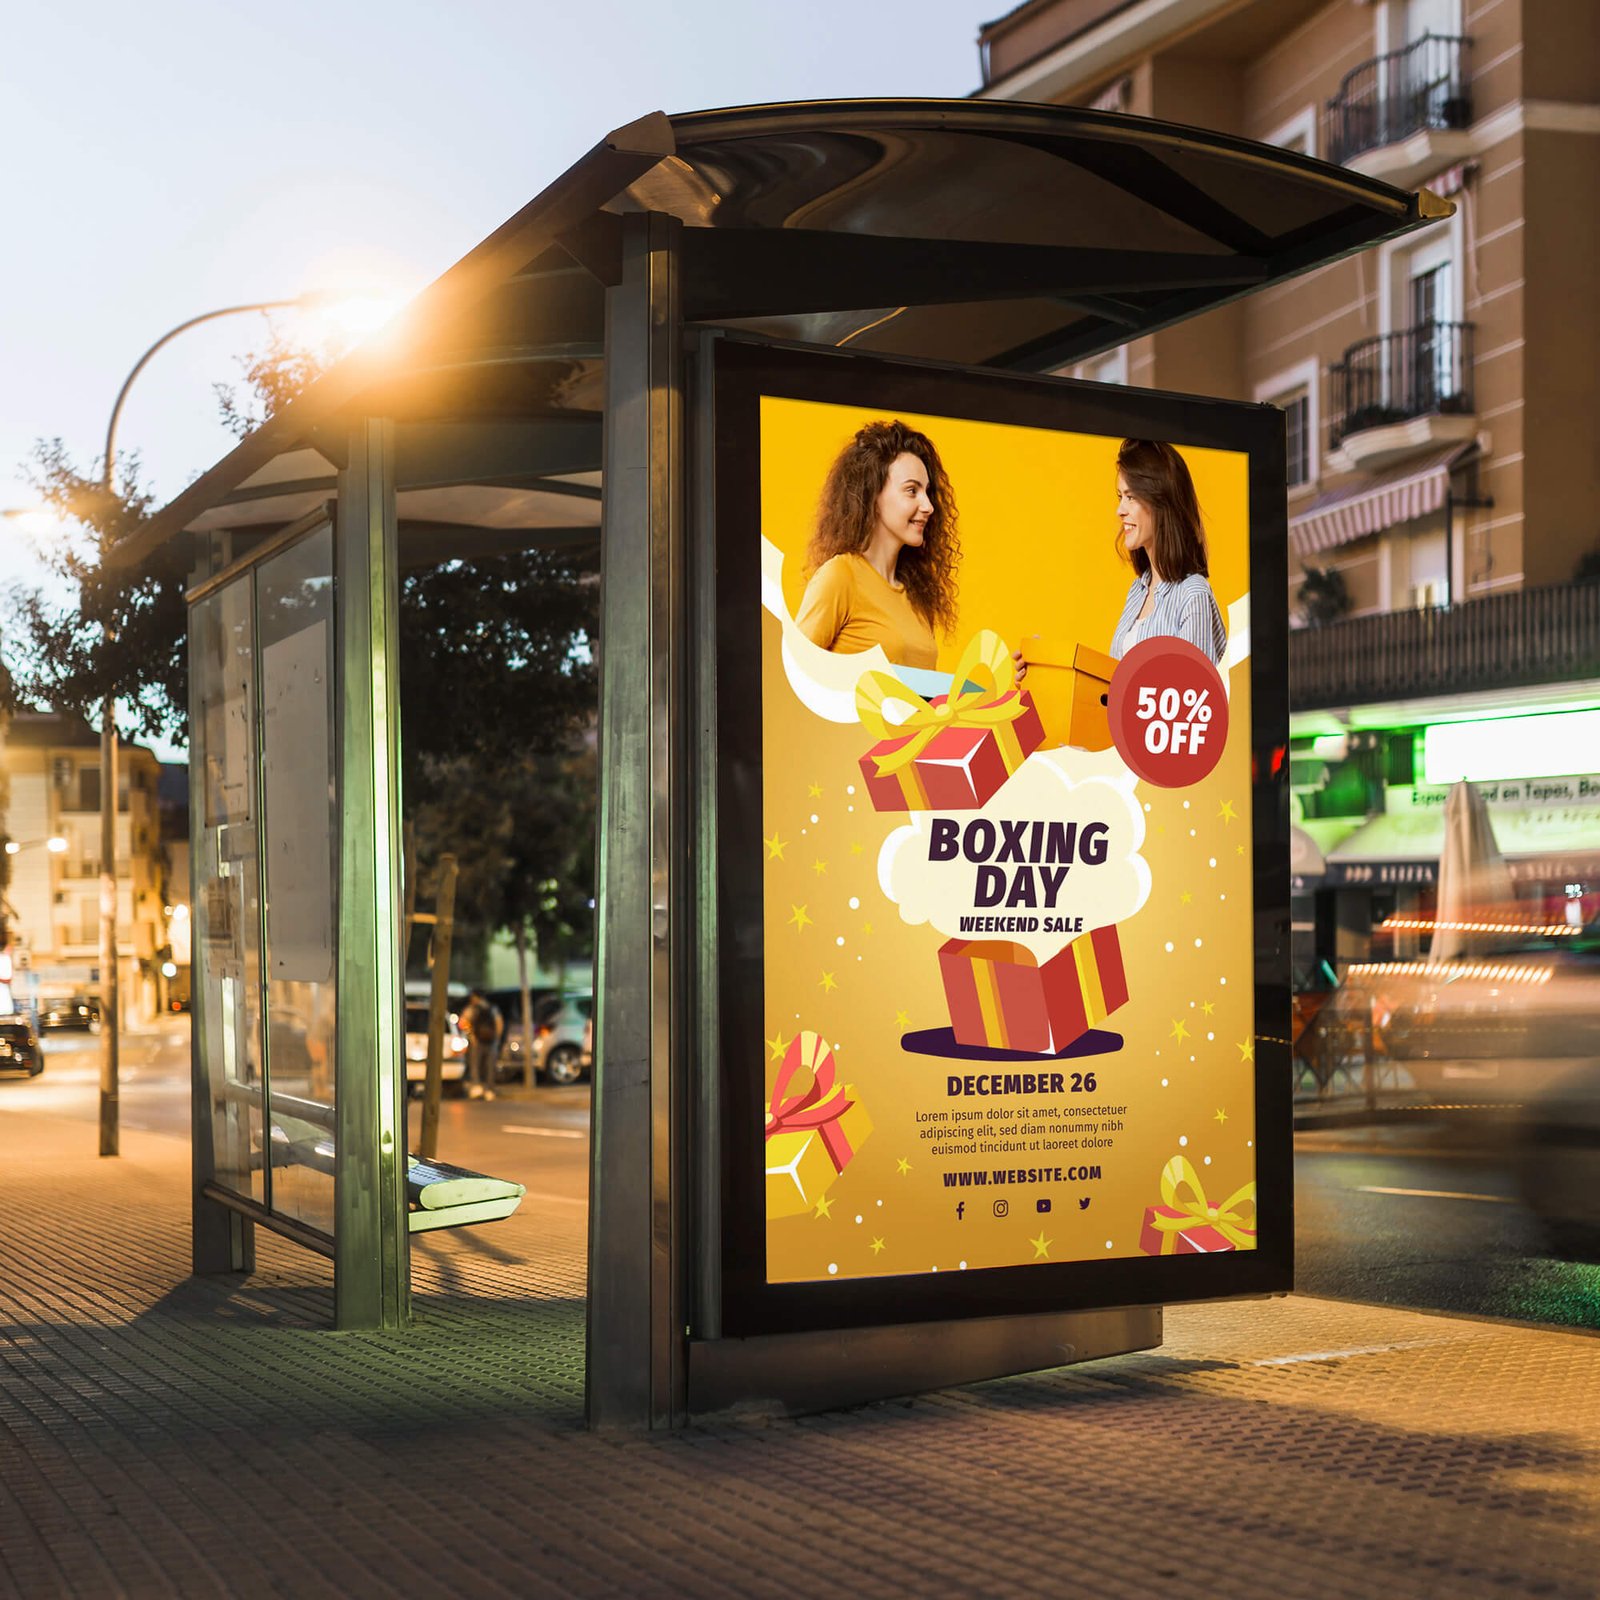 Free Bus Poster Mockup PSD Template